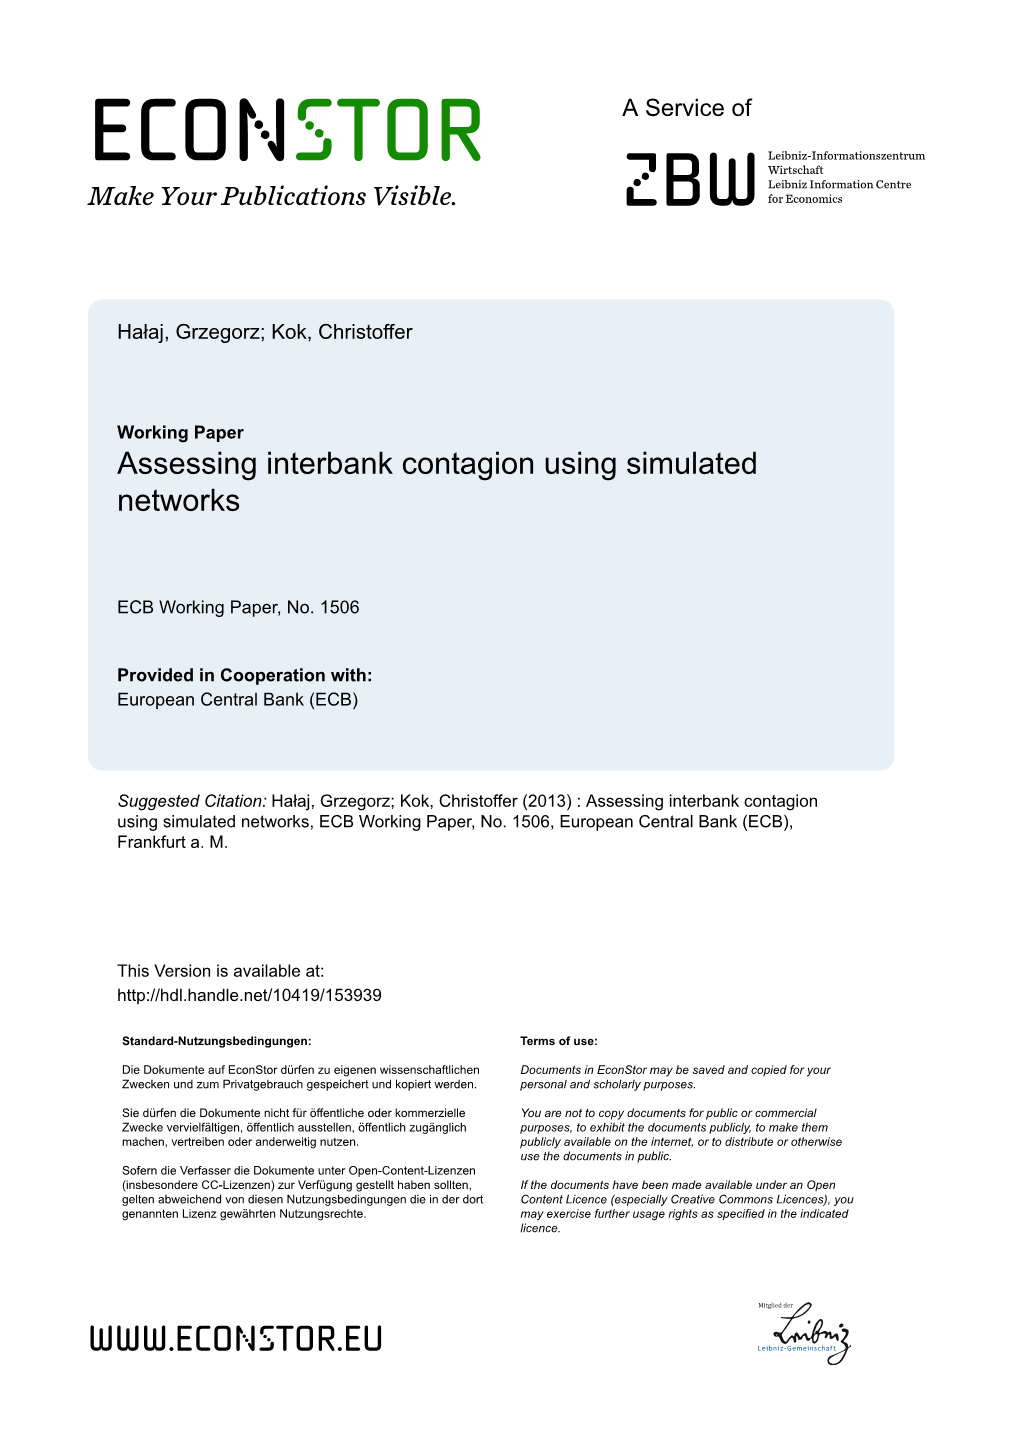 Assessing Interbank Contagion Using Simulated Networks